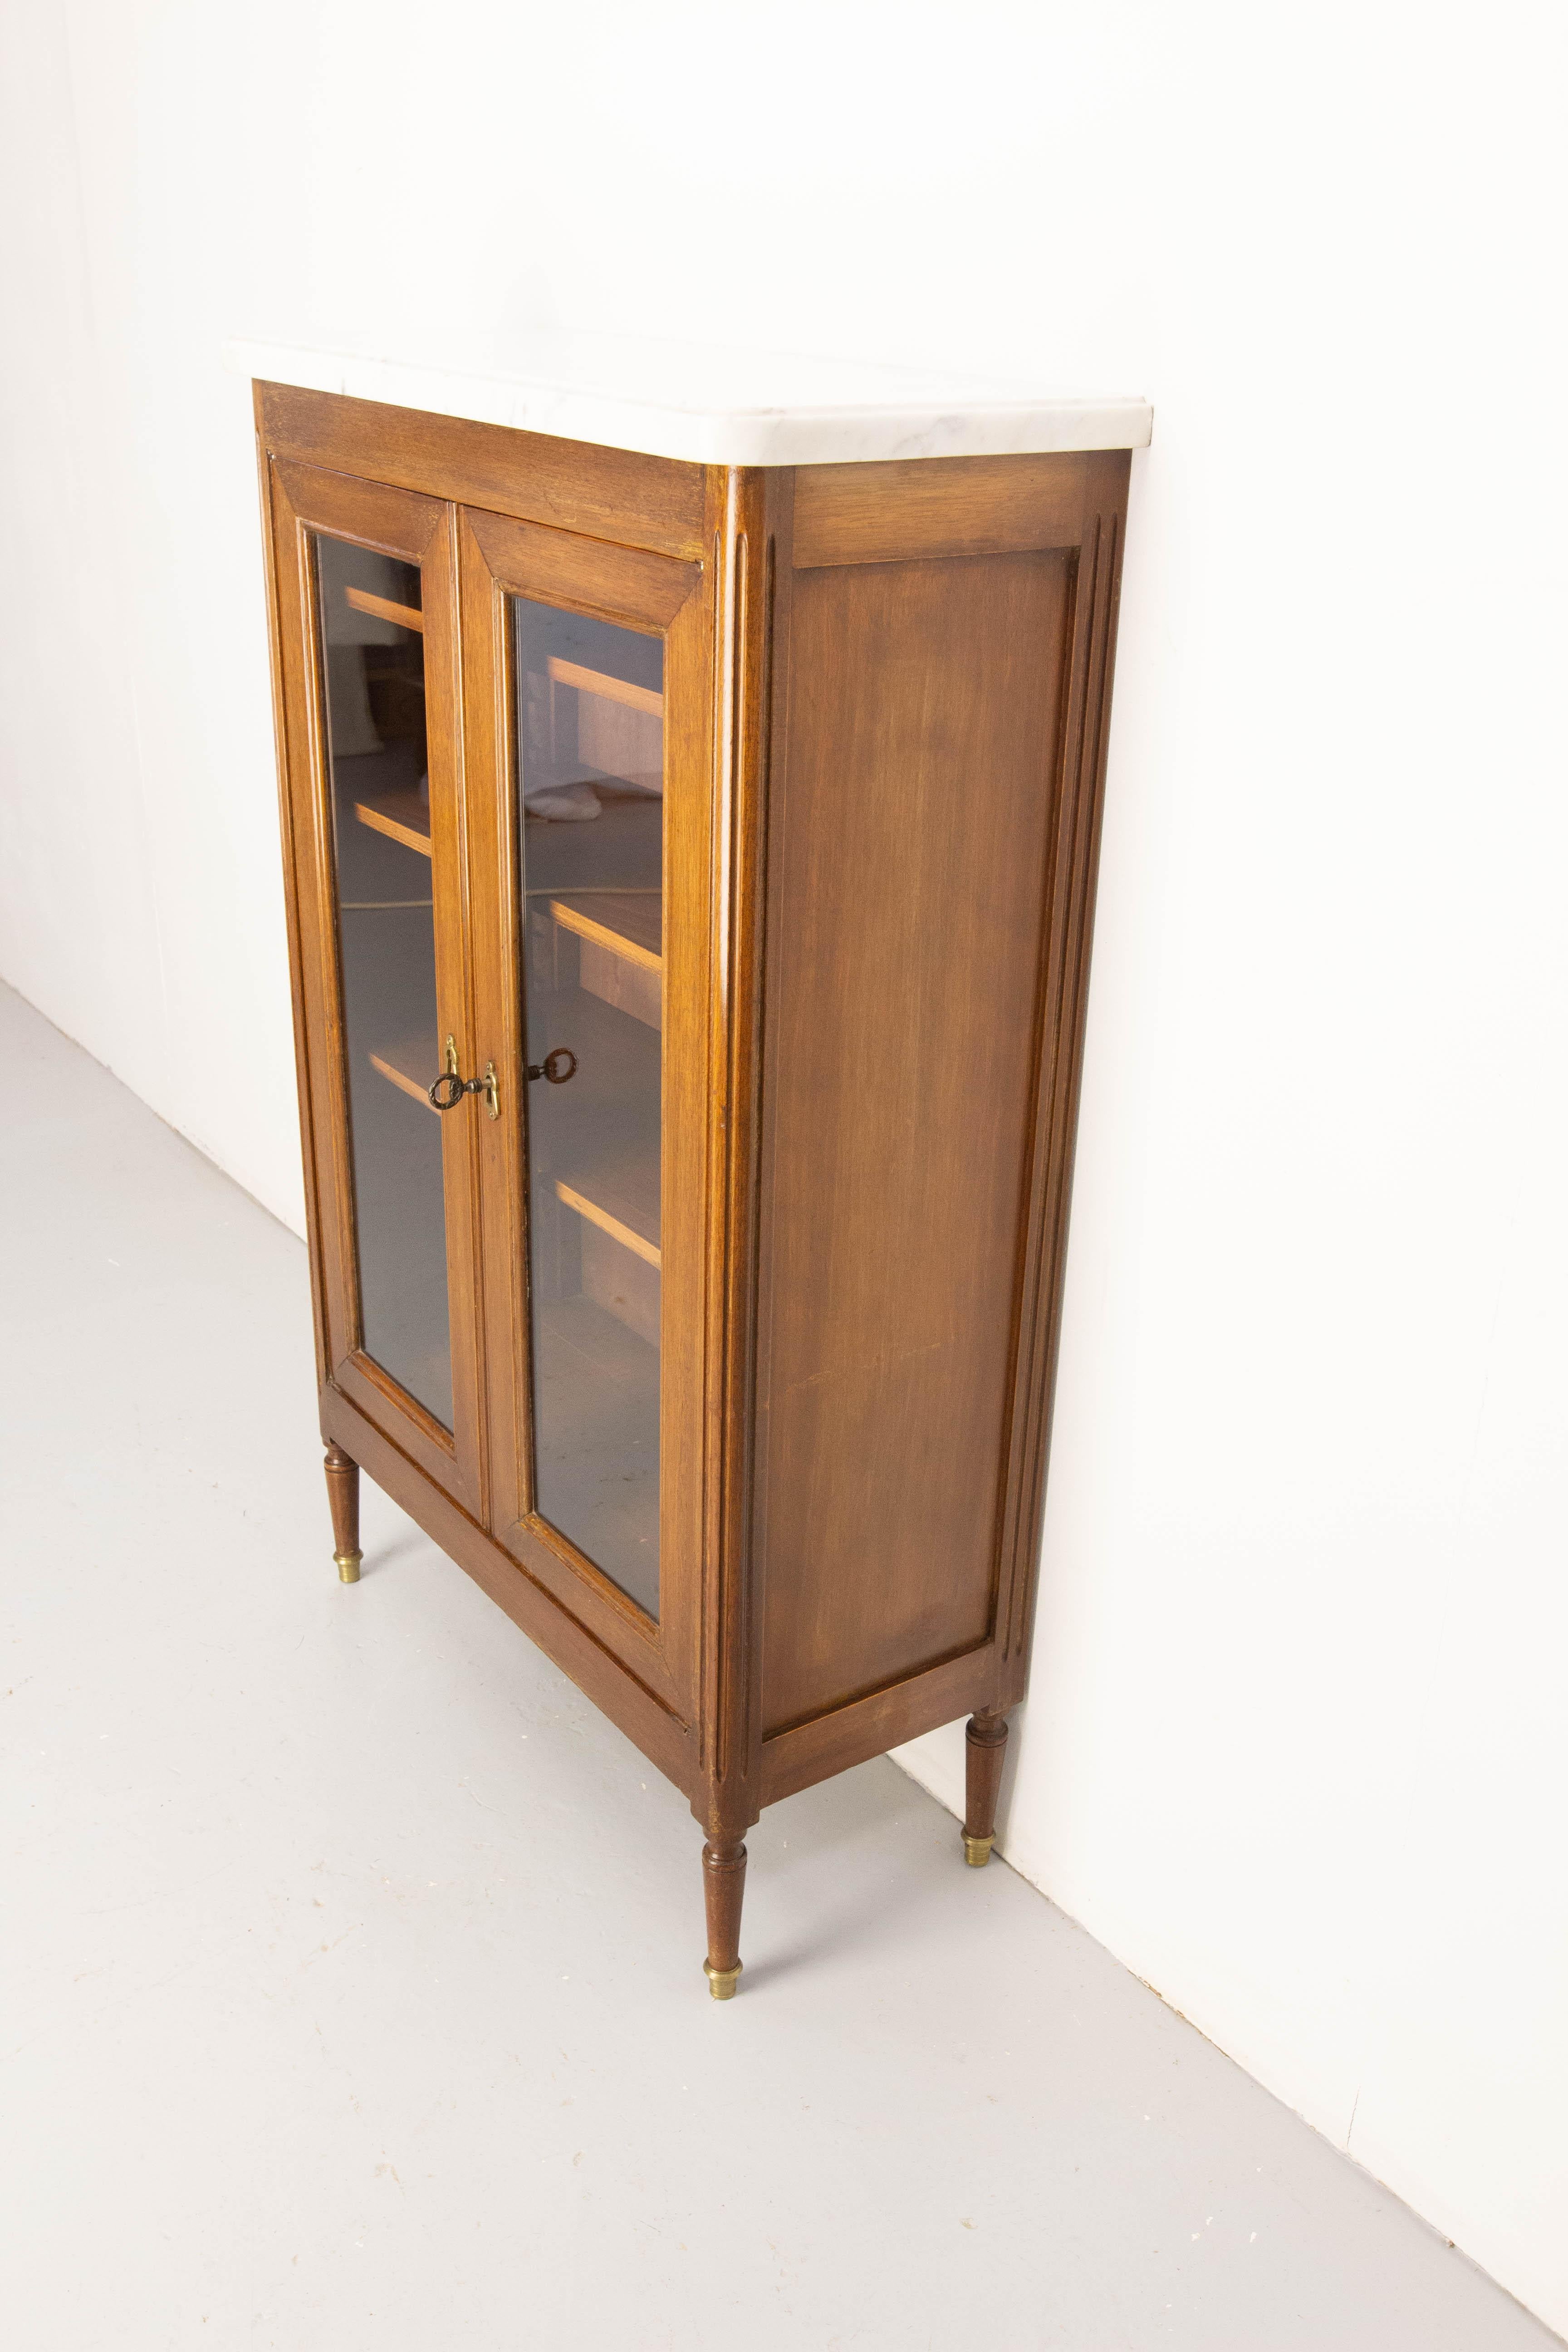 20th Century French Glass Cabinet or Little Vitrine Massive Iroko, French, circa 1920 For Sale